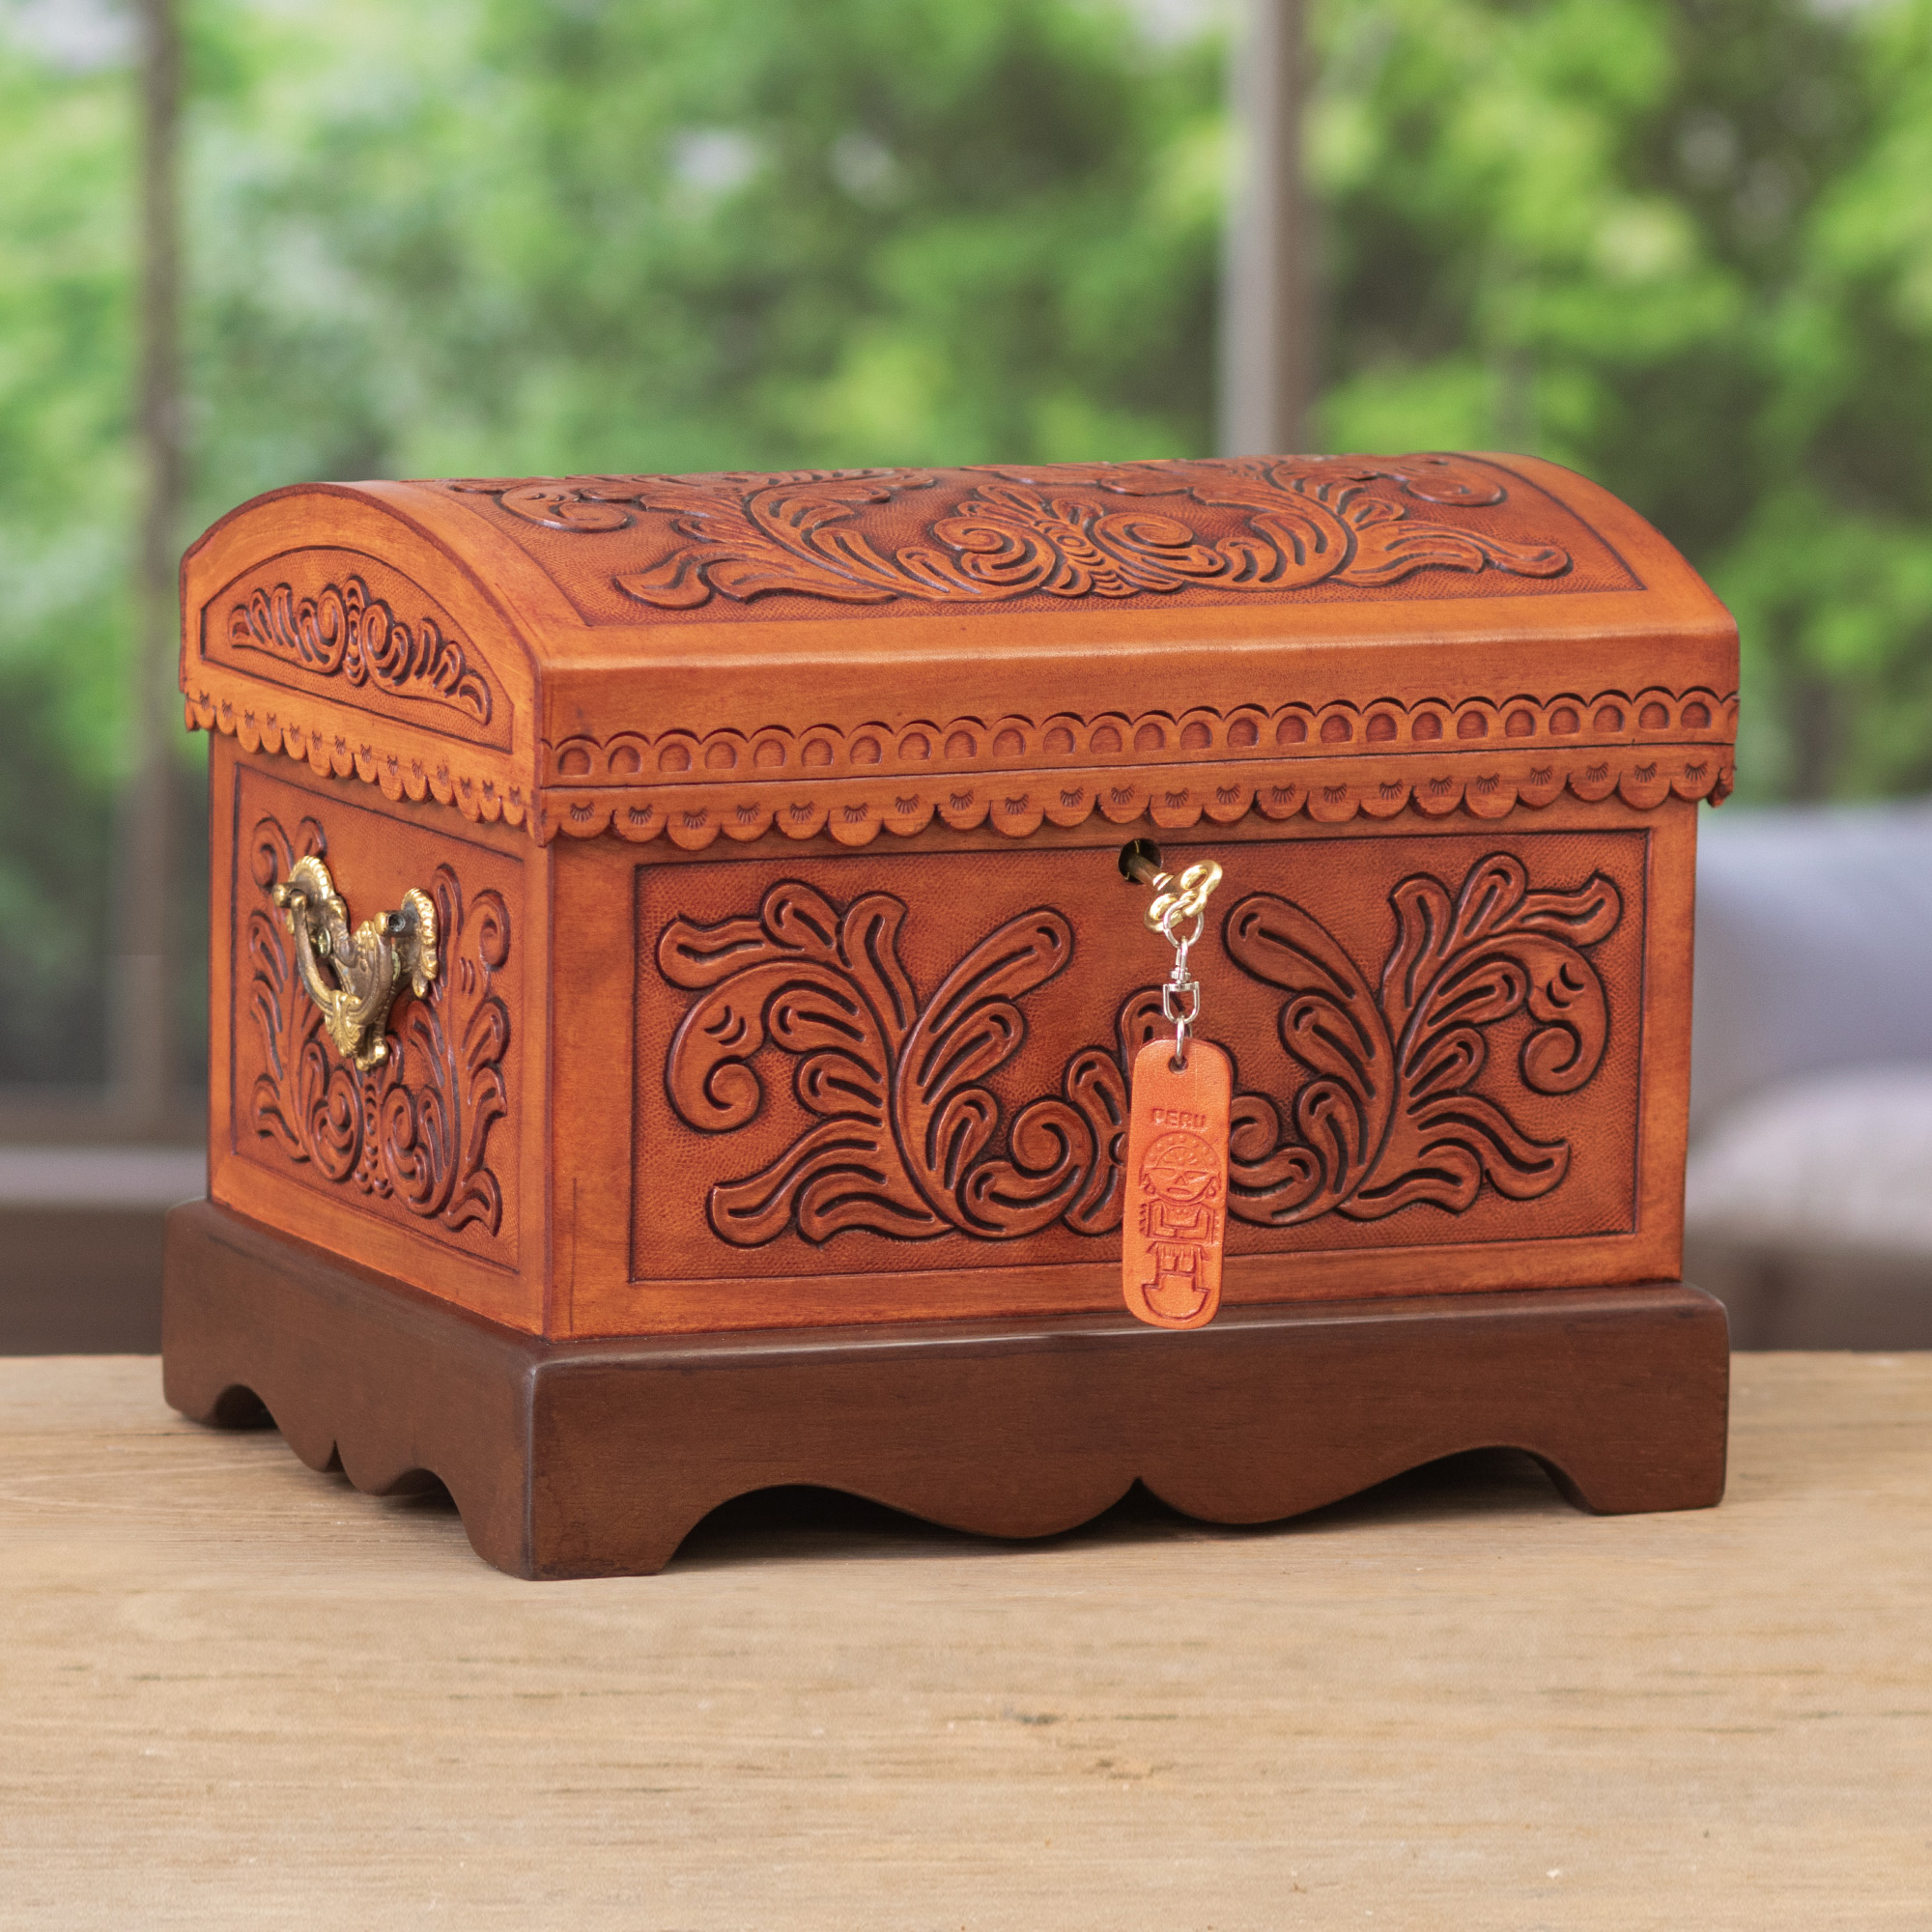 Vintage Hand-Carved Wooden Box Made in Mexico